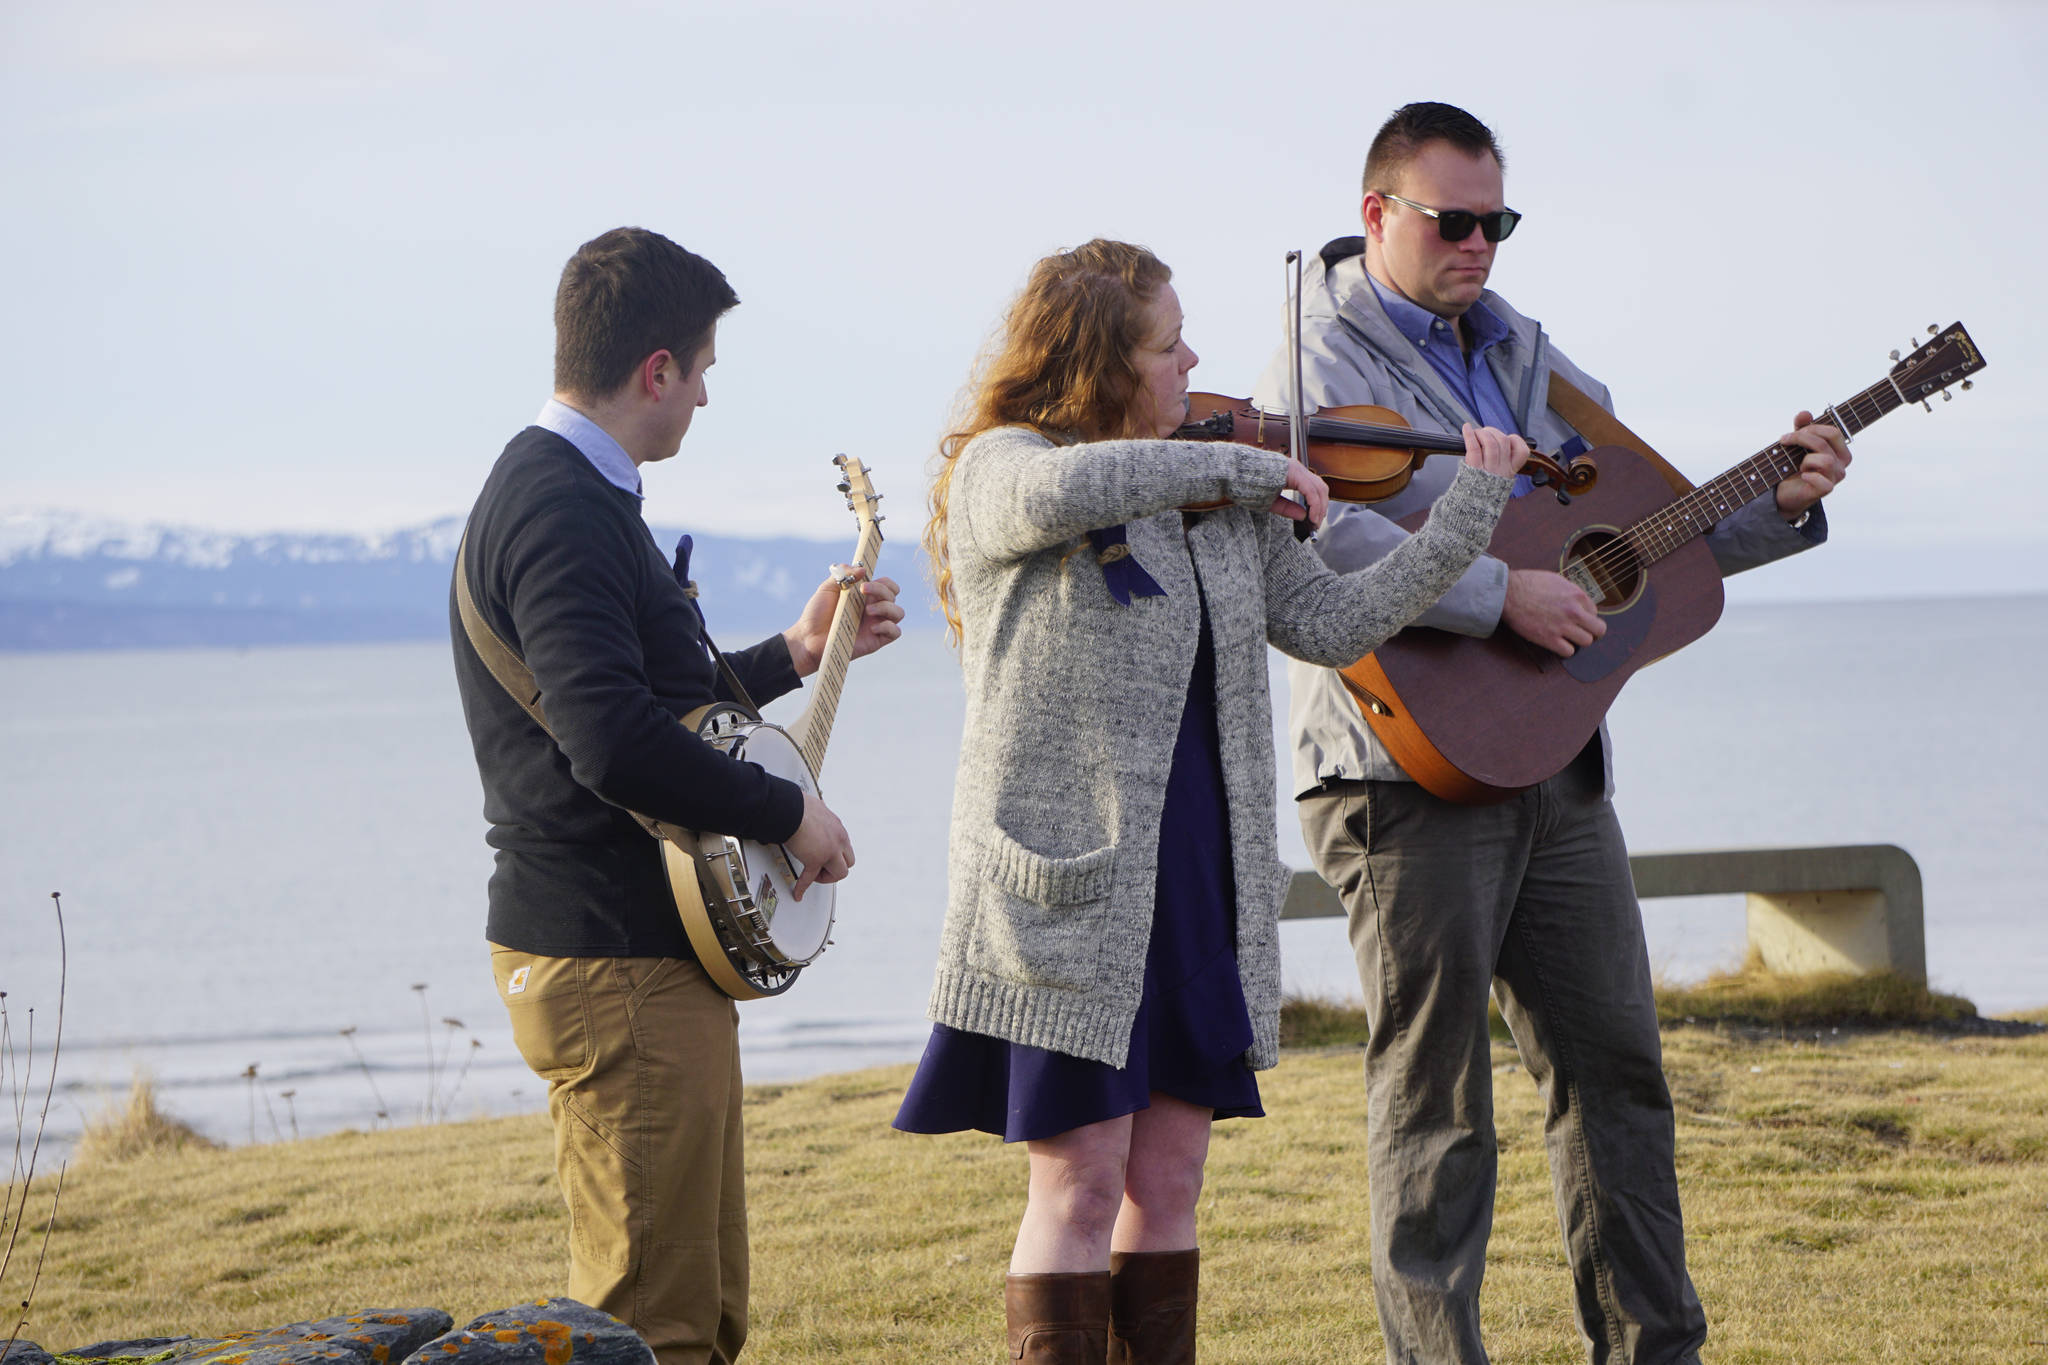 From left to right, Josh Kennedy, Kate Klann and Geddy Miller perform “I Bid You Goodbye” at a memorial service for Chief Warrant Officer Michael Kozloski on Friday morning, Feb. 8, 2019, at the Seafarer’s Memorial on the Homer Spit, Homer, Alaska. Kennedy served on the U.S. Coast Cutter Hickory with Kozloski and Miller is captain of the U.S. Coast Guard Cutter Naushon. (Photo by Michael Armstrong/Homer News)